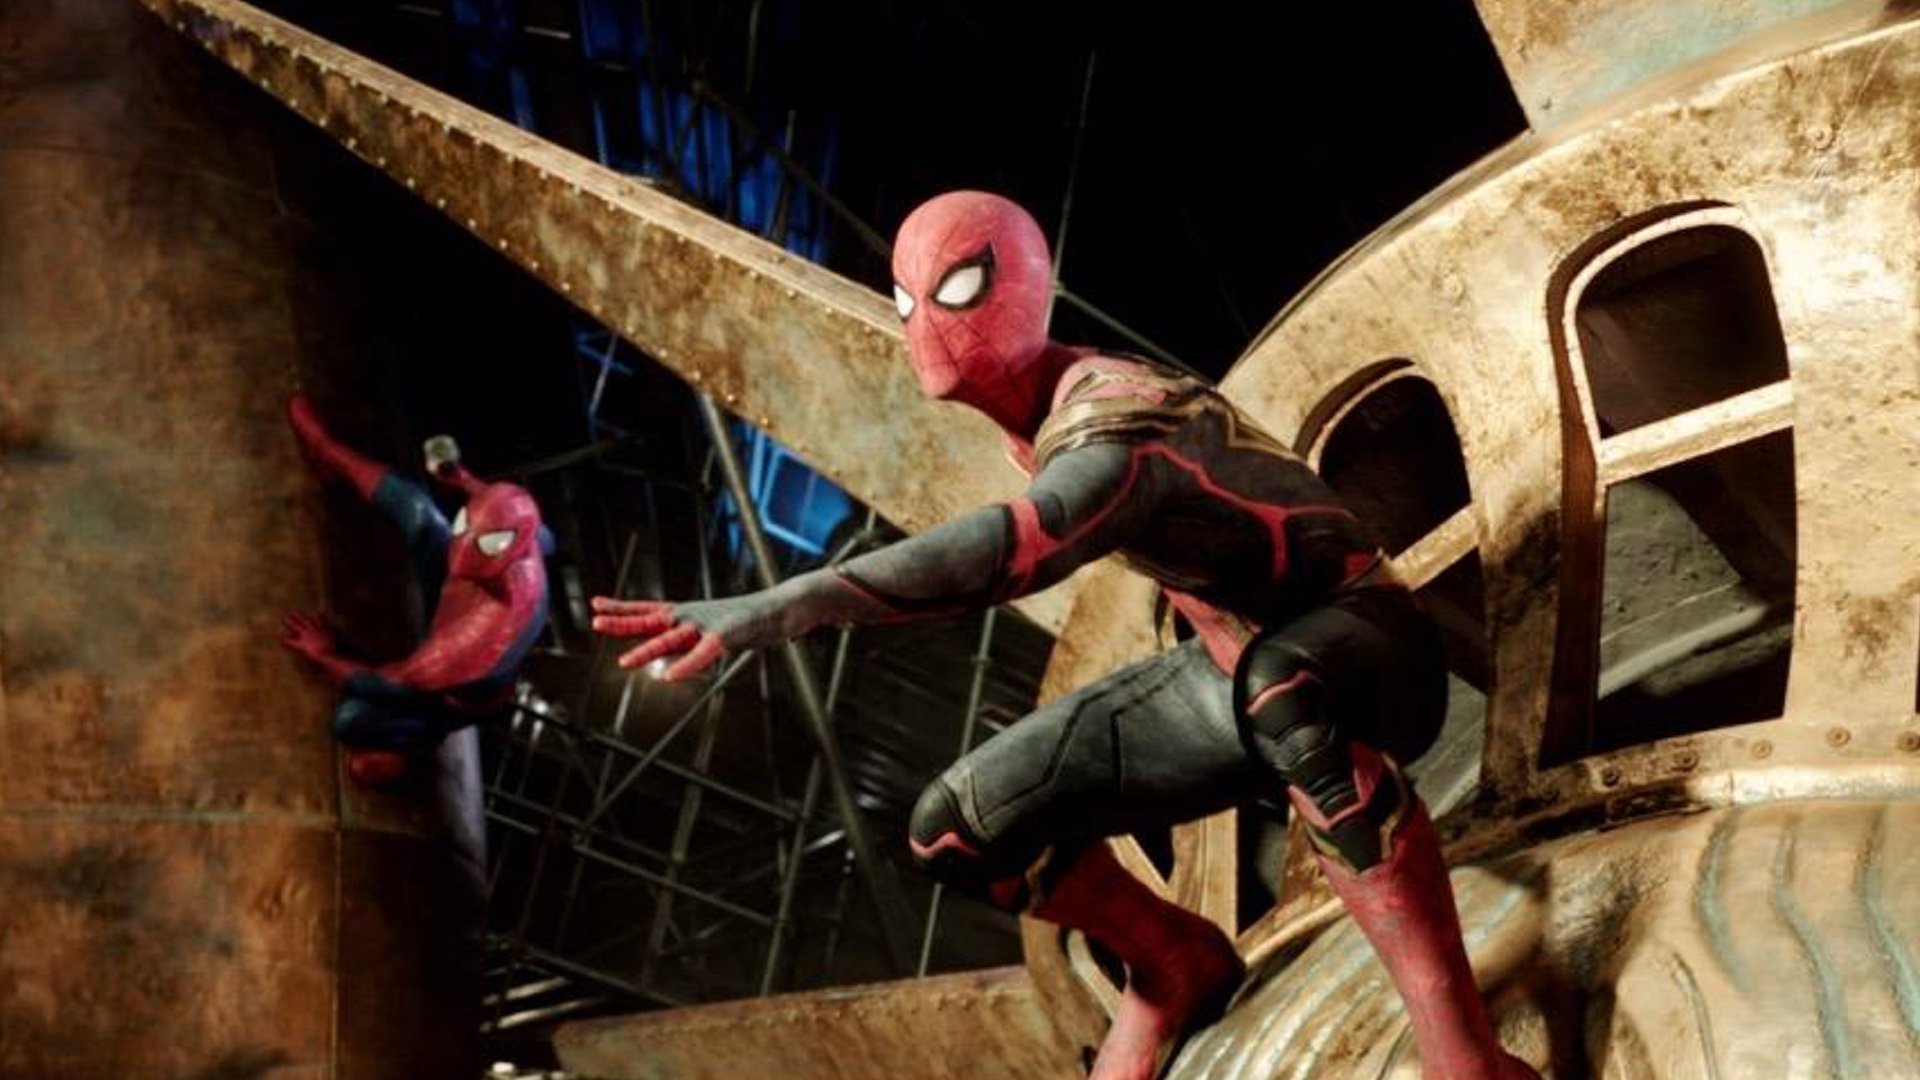 New SPIDER MAN: NO WAY HOME Photo Show Off The Three Spider Man Characters Together!